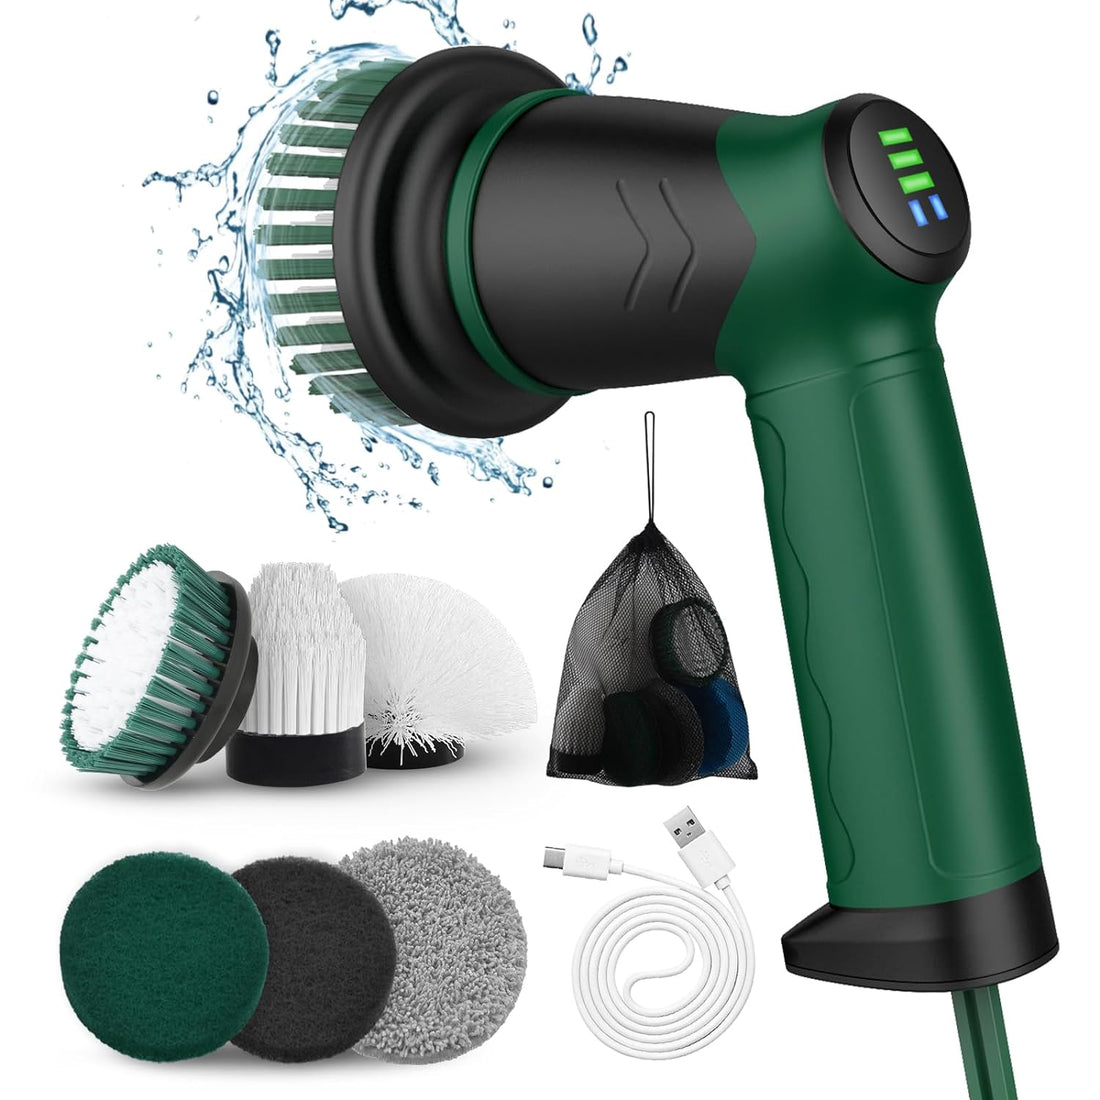 Electric Cleaning Brush Set,Portable Electric Spin Scrubber,Bathroom Scrubber Dual Speed,Handheld Scrubber with 7 Brush Heads,Spin Scrubber for Bathroom,Floor,Tile,Tub,Kitchen,Oven,Car